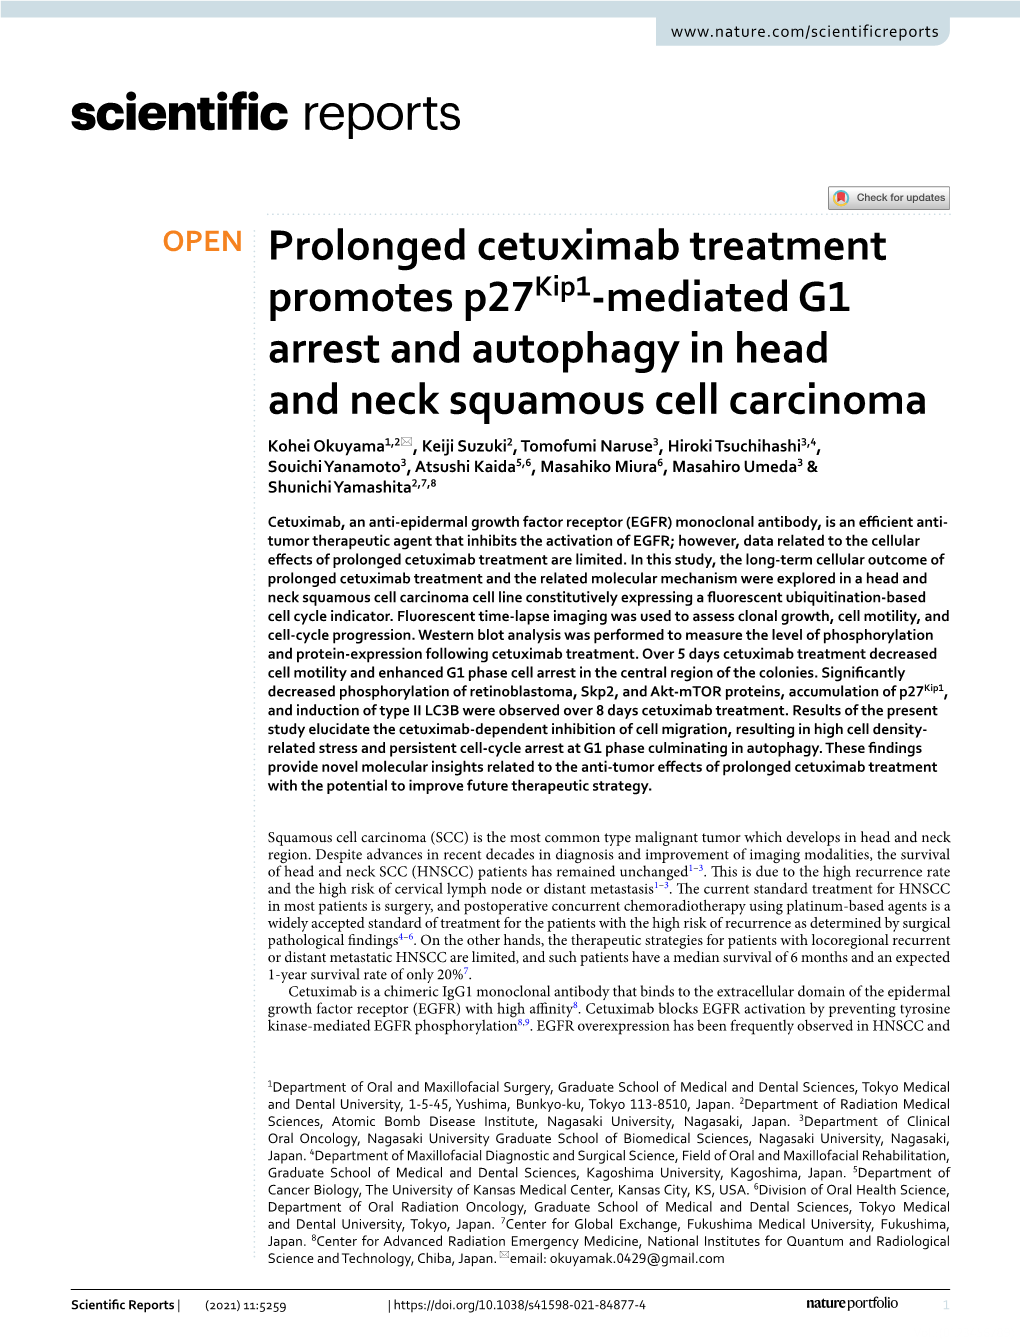 Prolonged Cetuximab Treatment Promotes P27kip1-Mediated G1 Arrest and Autophagy in Head and Neck Squamous Cell Carcinoma